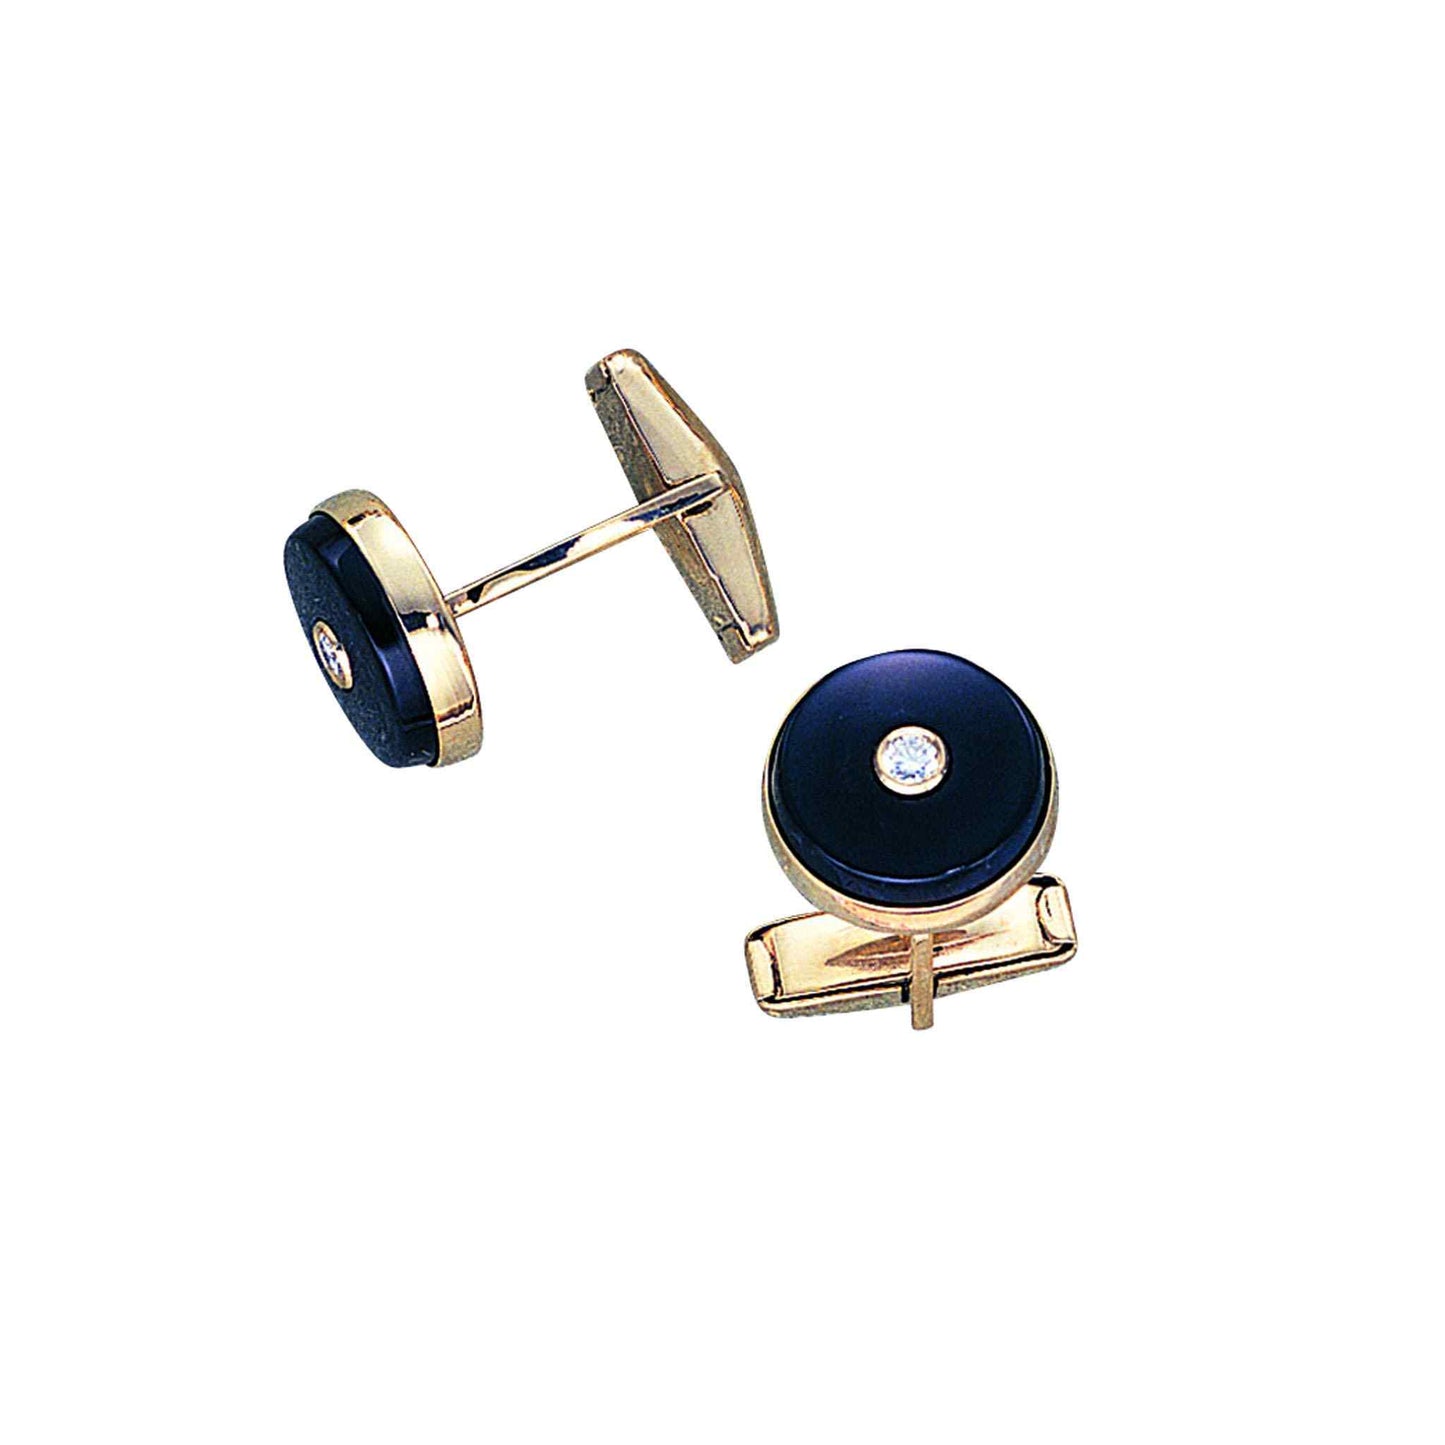 A 14k yellow gold round onyx cufflinks with .20ctw diamonds displayed on a neutral white background.